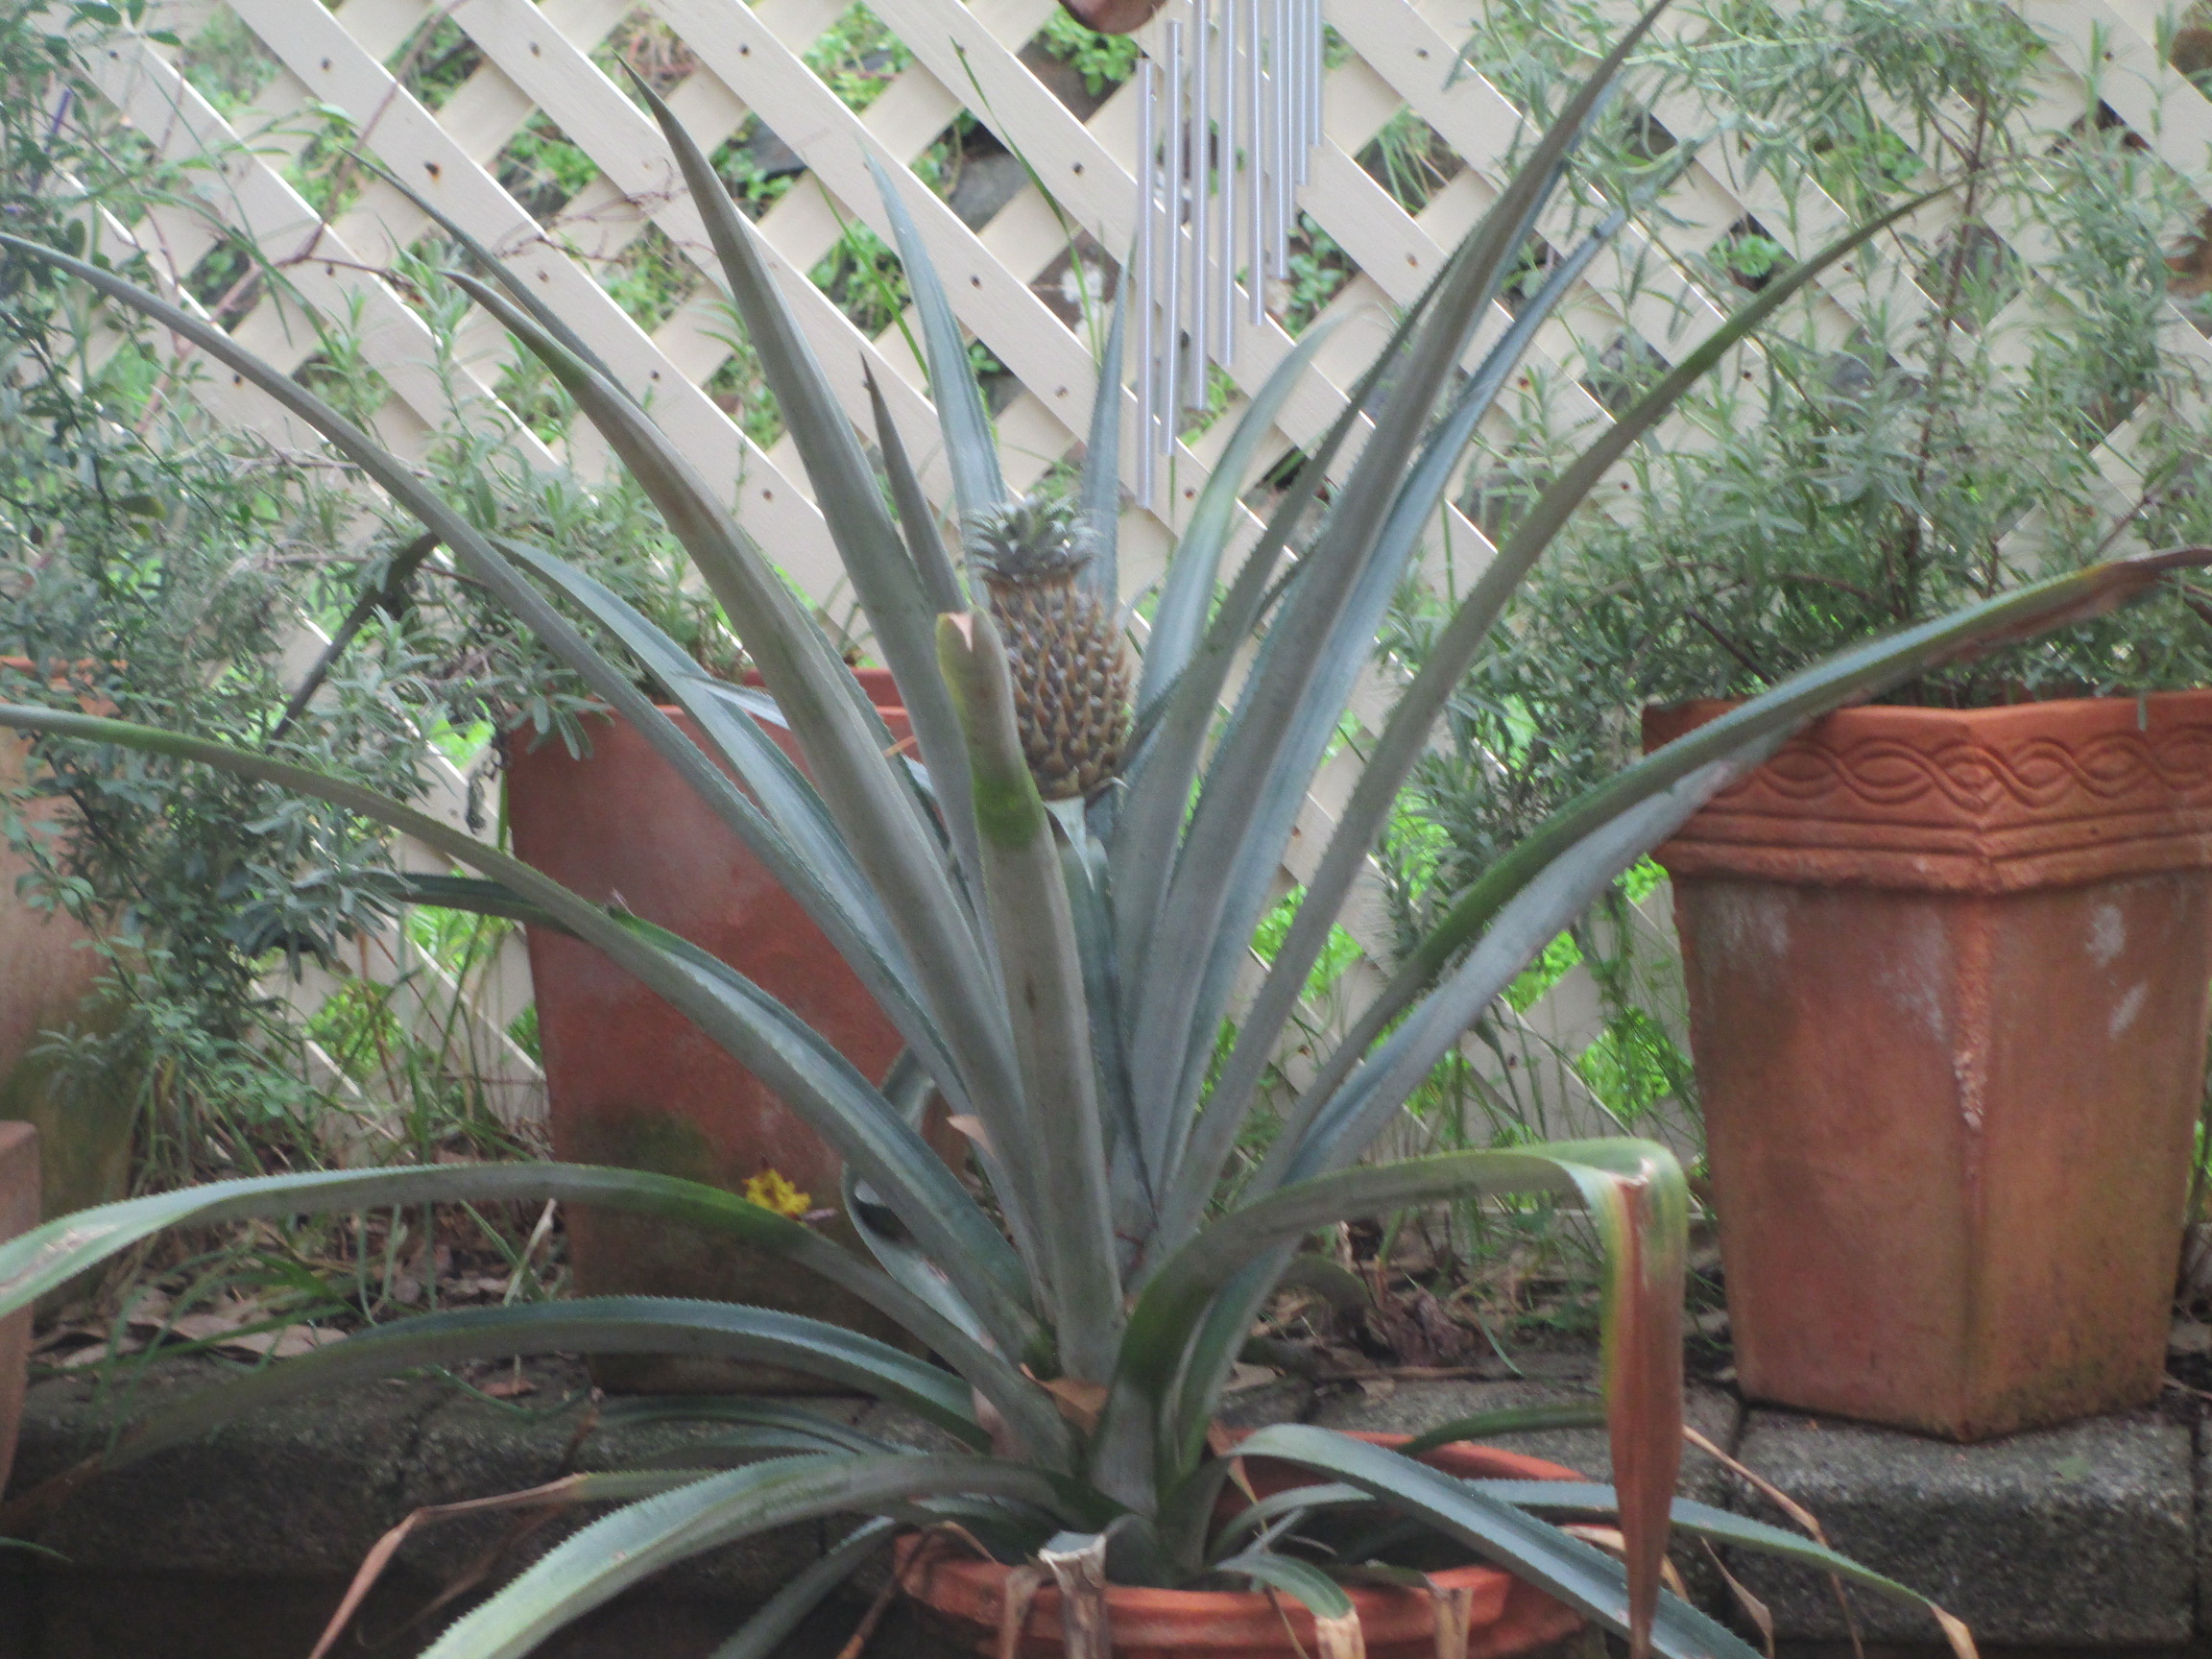 Pineapple growing in a pot